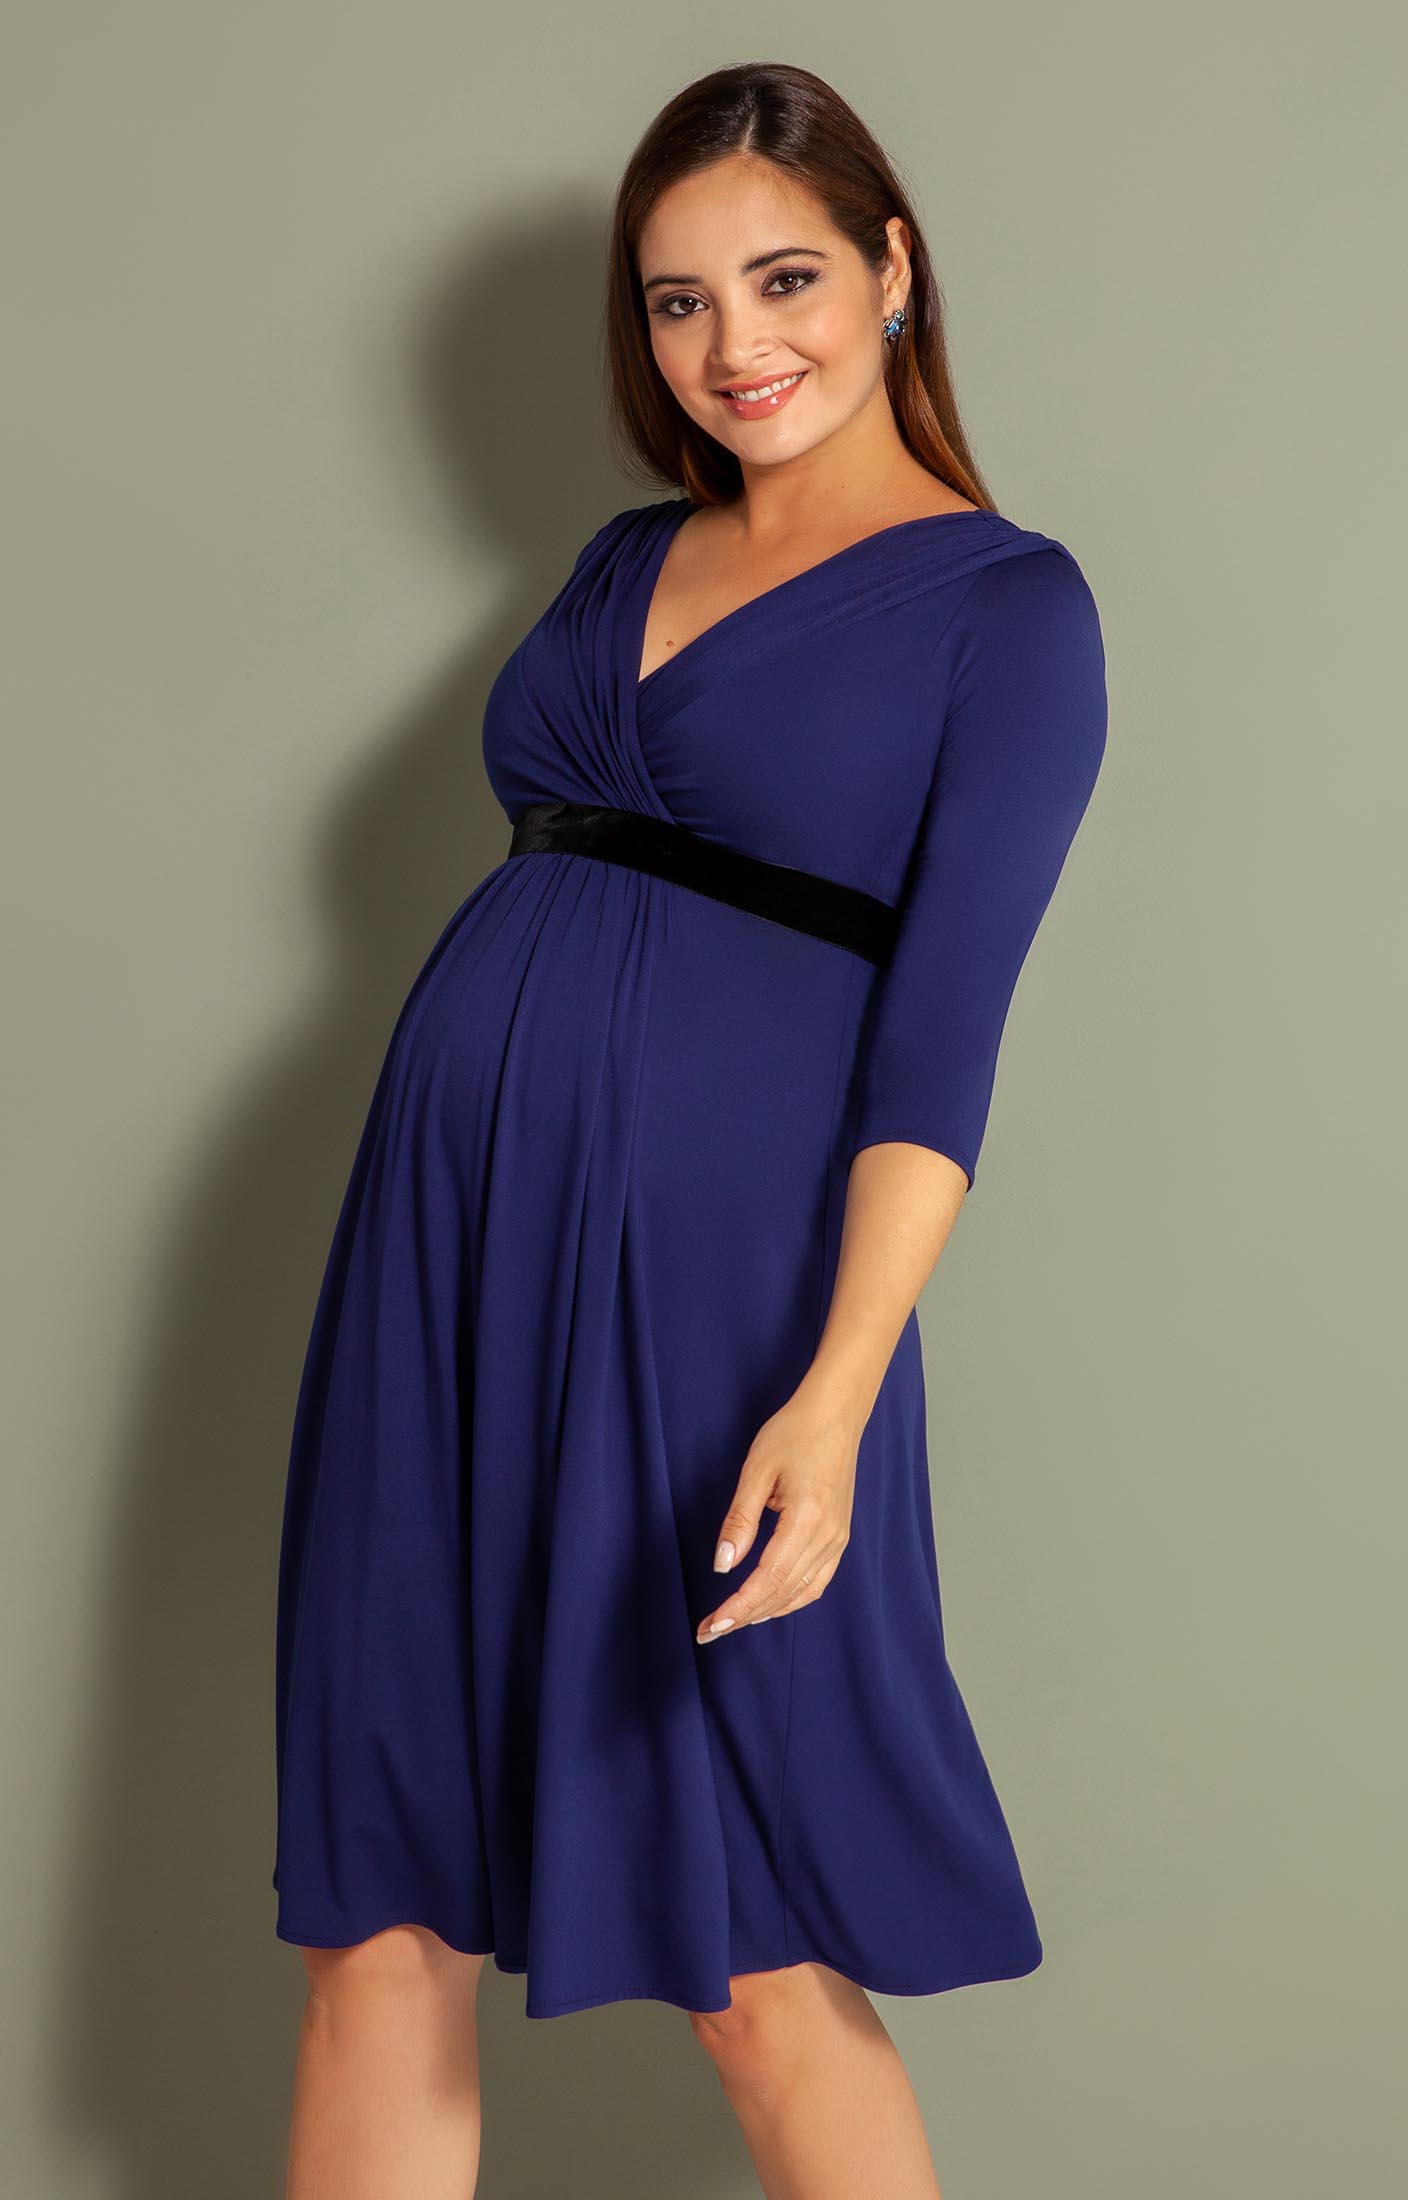 Willow Maternity Dress Eclipse Blue Maternity Wedding Dresses Evening Wear And Party Clothes